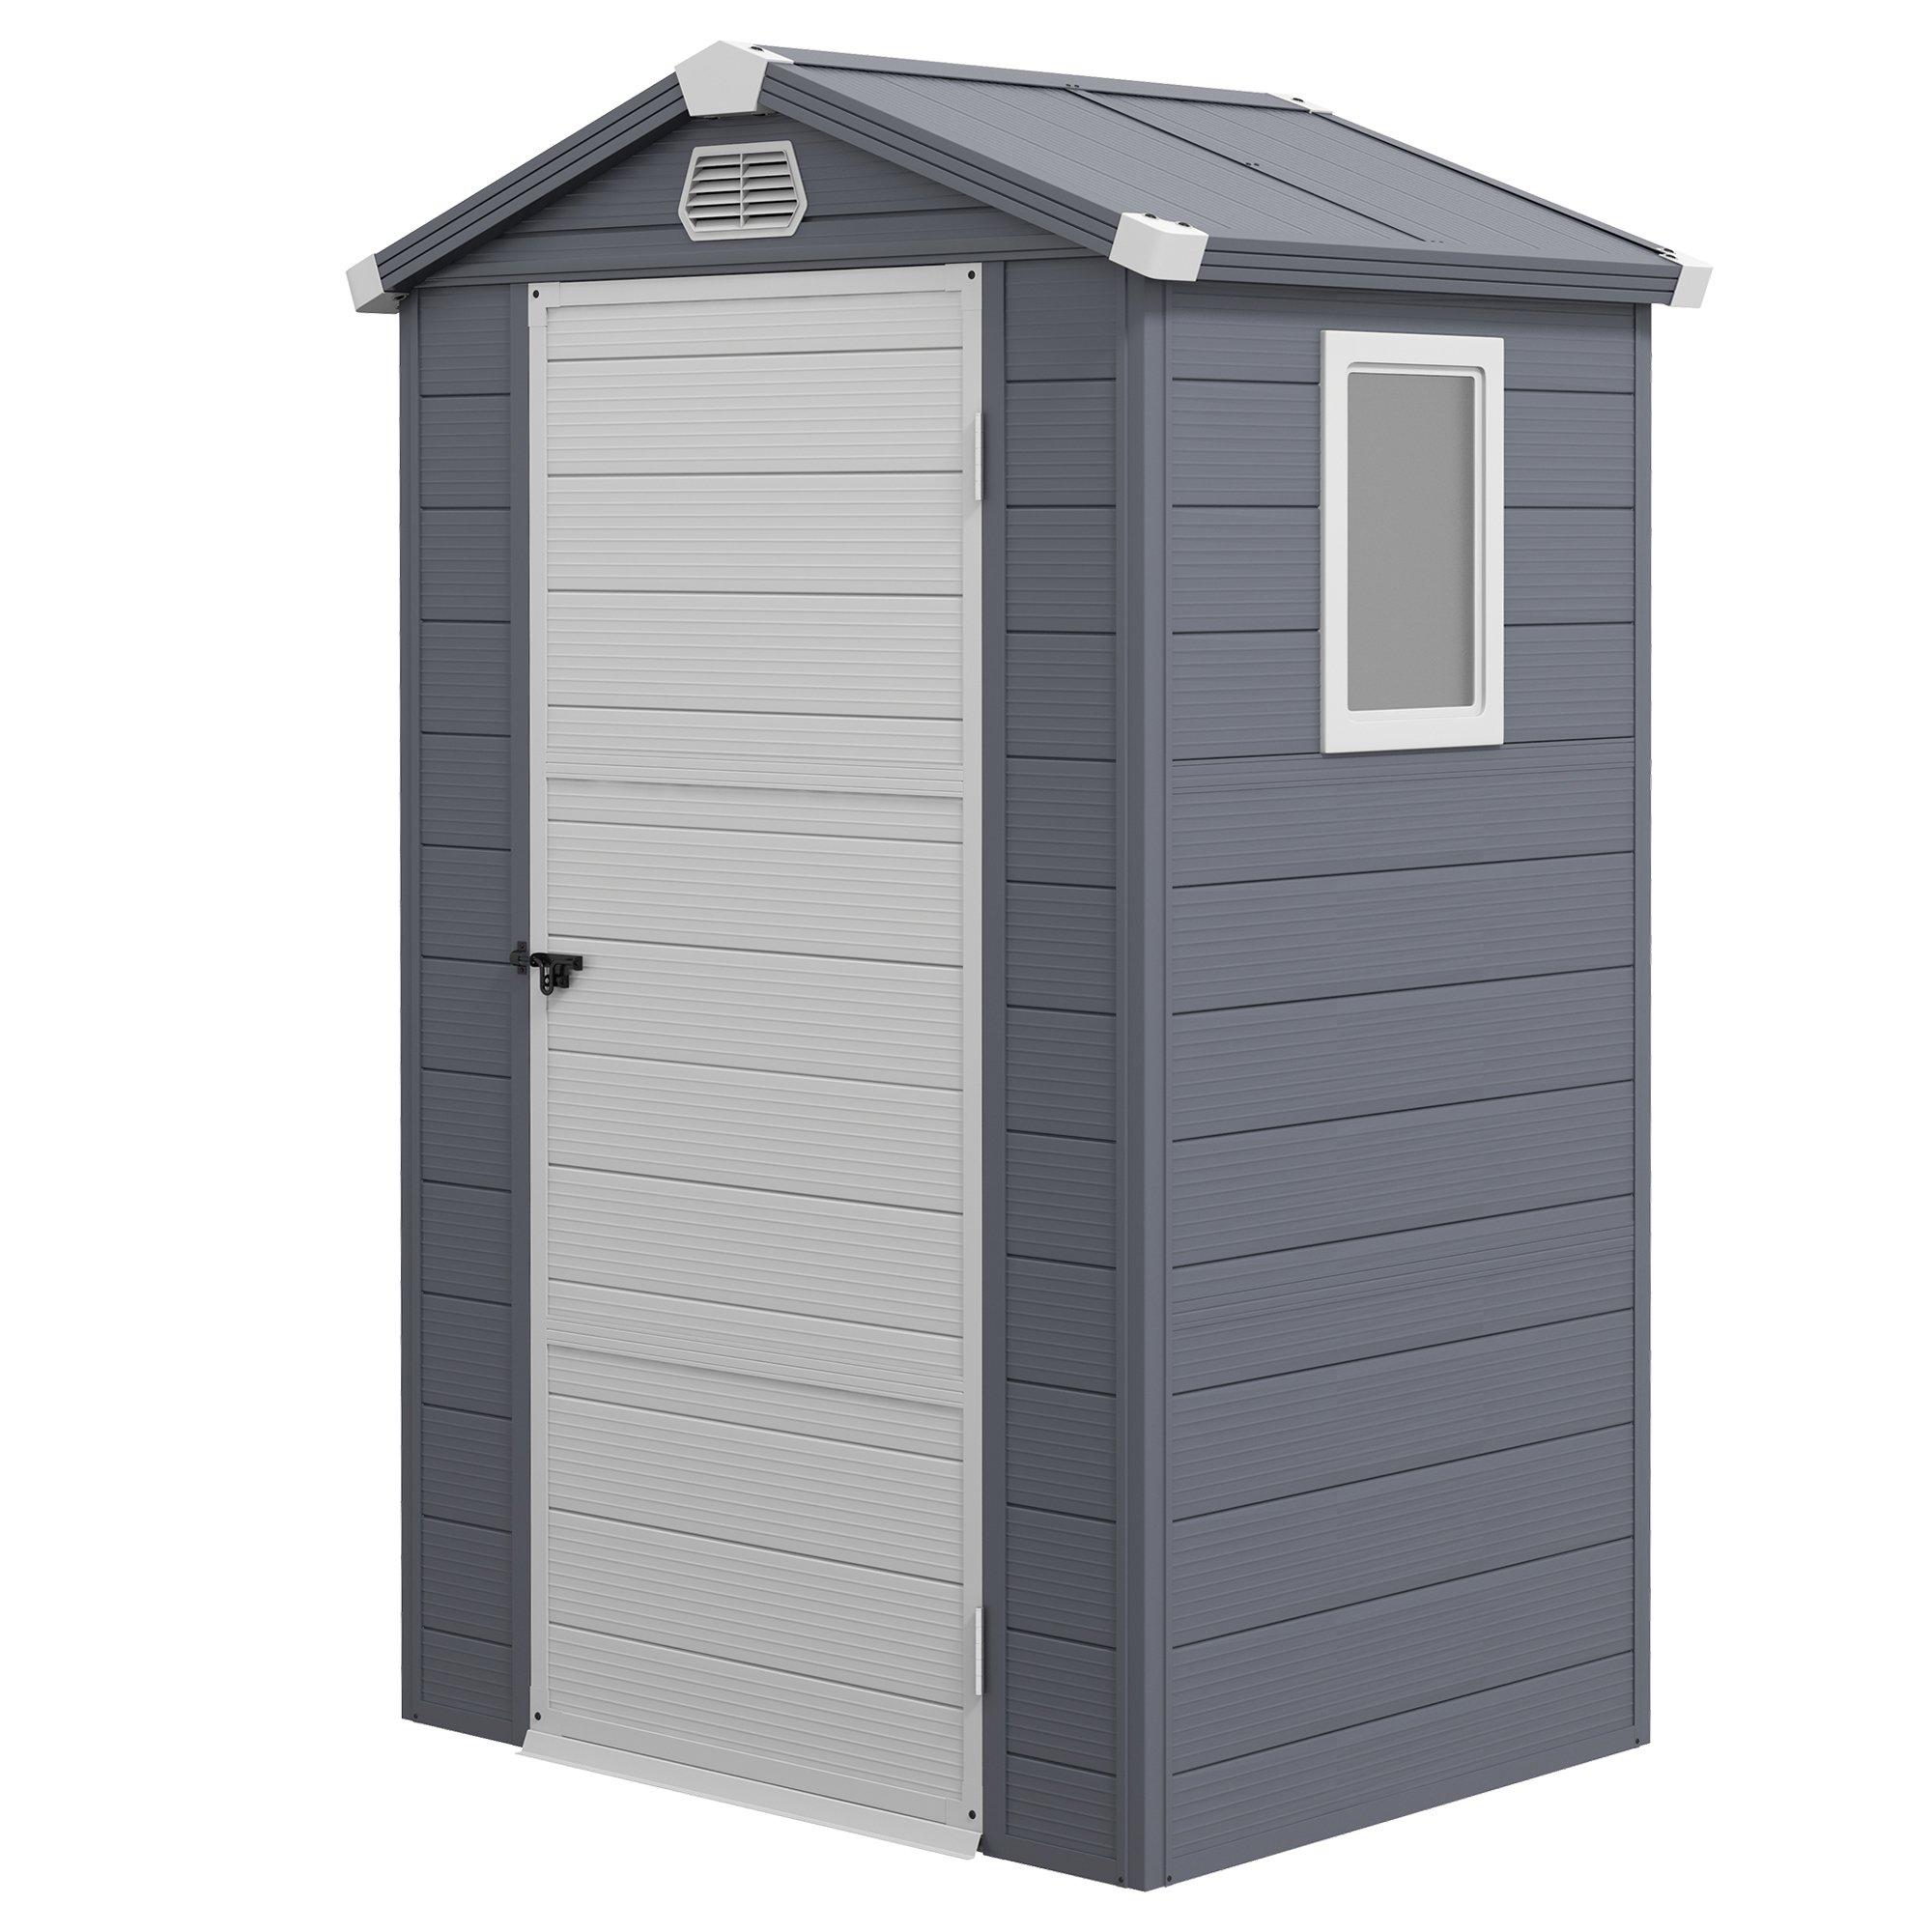 4 x 3ft Garden Shed Storage with Foundation Kit and Vents, Grey